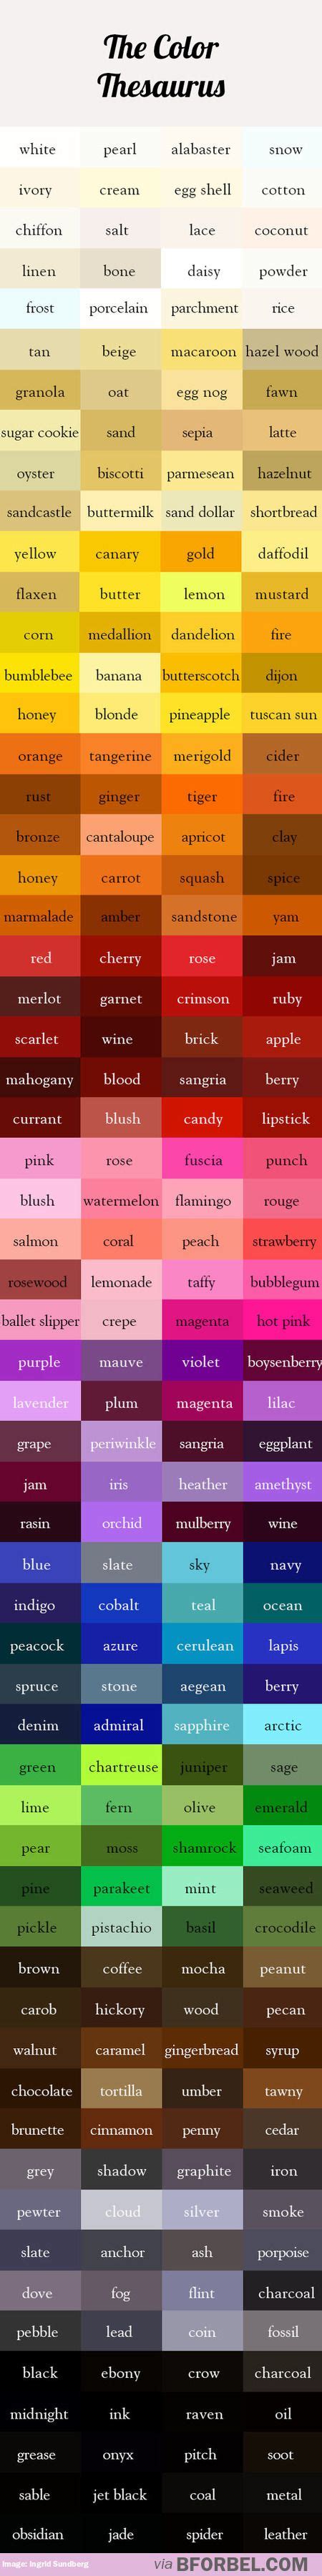 Introducing The Color Thesaurus To Help You Describe The Perfect Shade